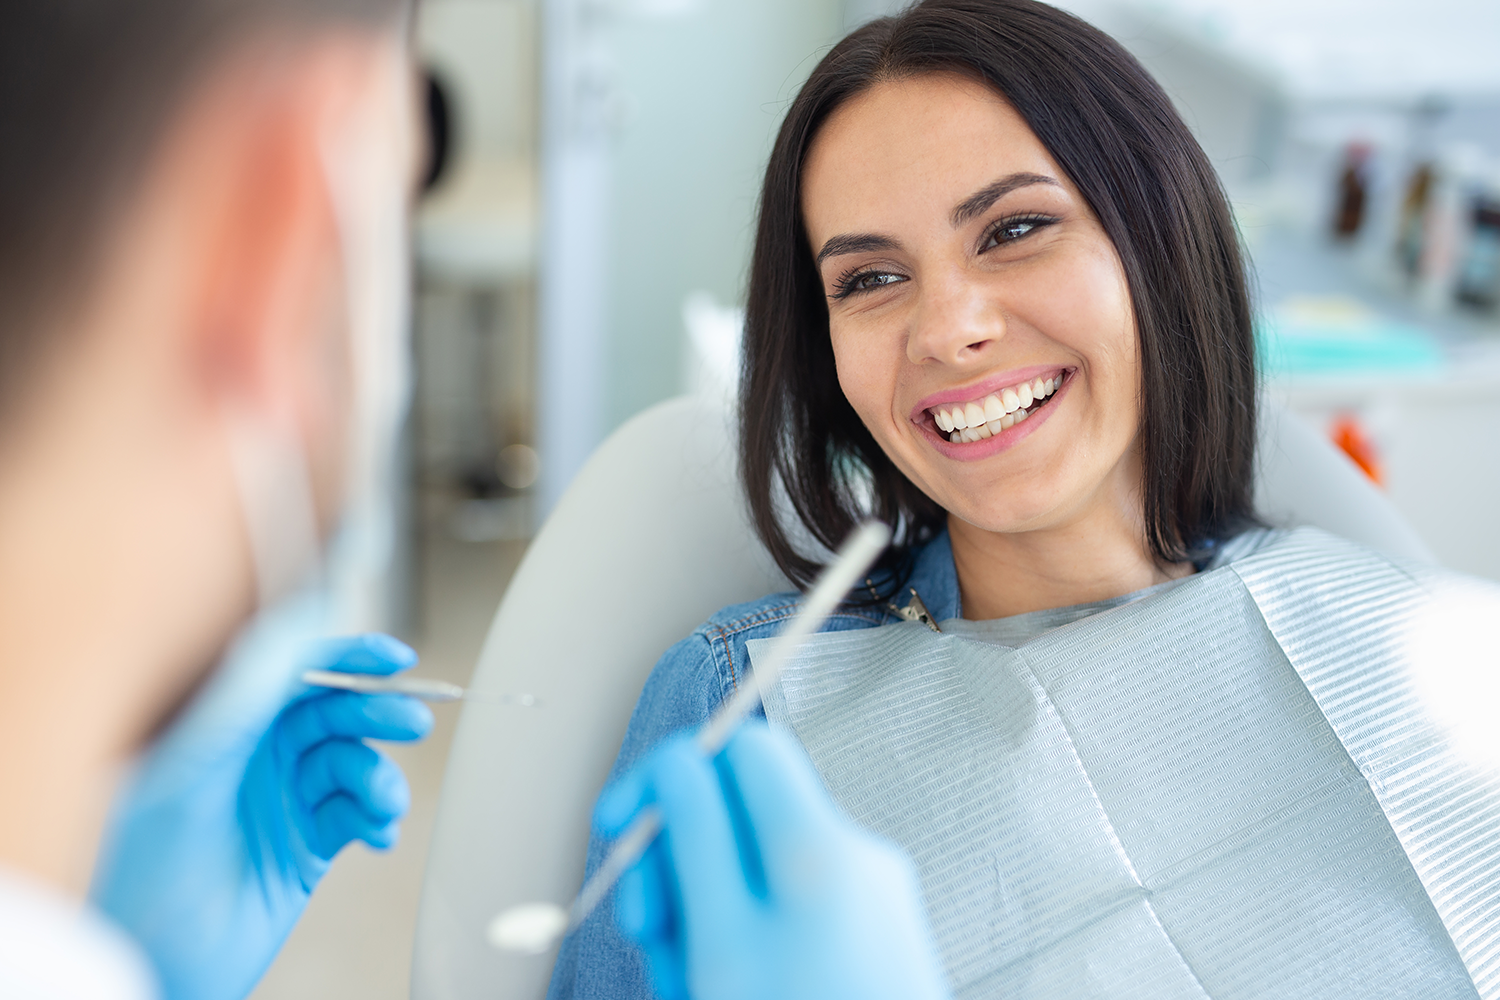 girl sitting in dental chair smiling showing her teeth while the dental assistant looks at her teeth